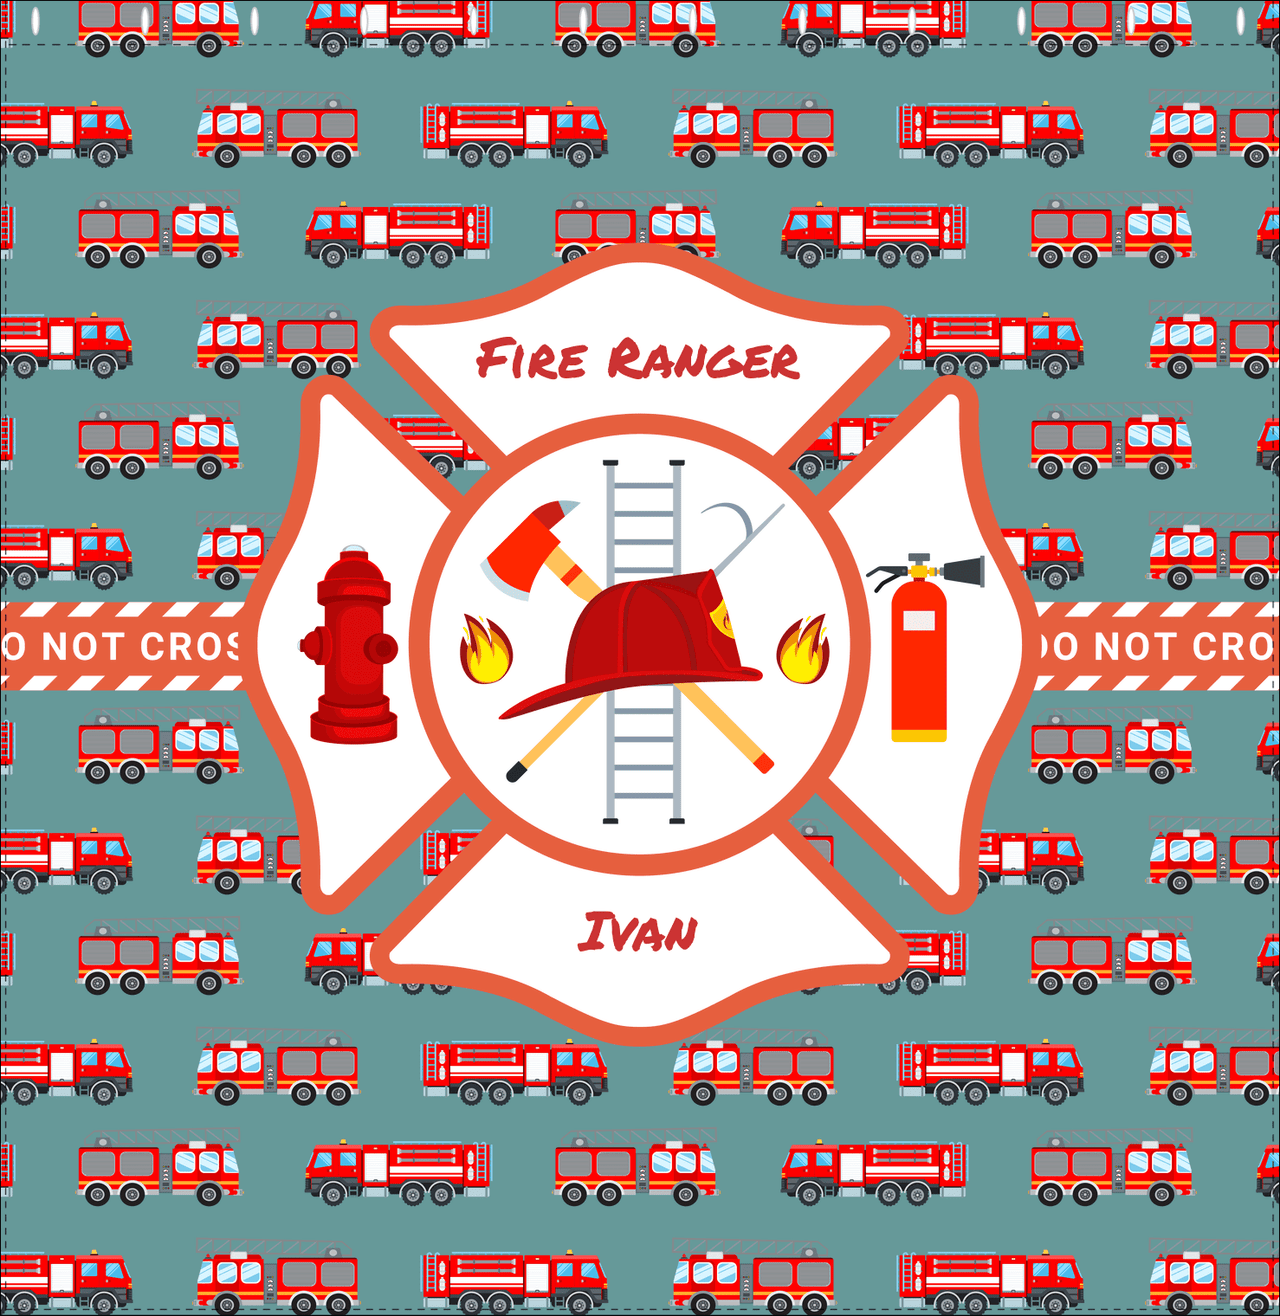 Personalized Fire Truck Shower Curtain XIII - Teal Background - Decorate View